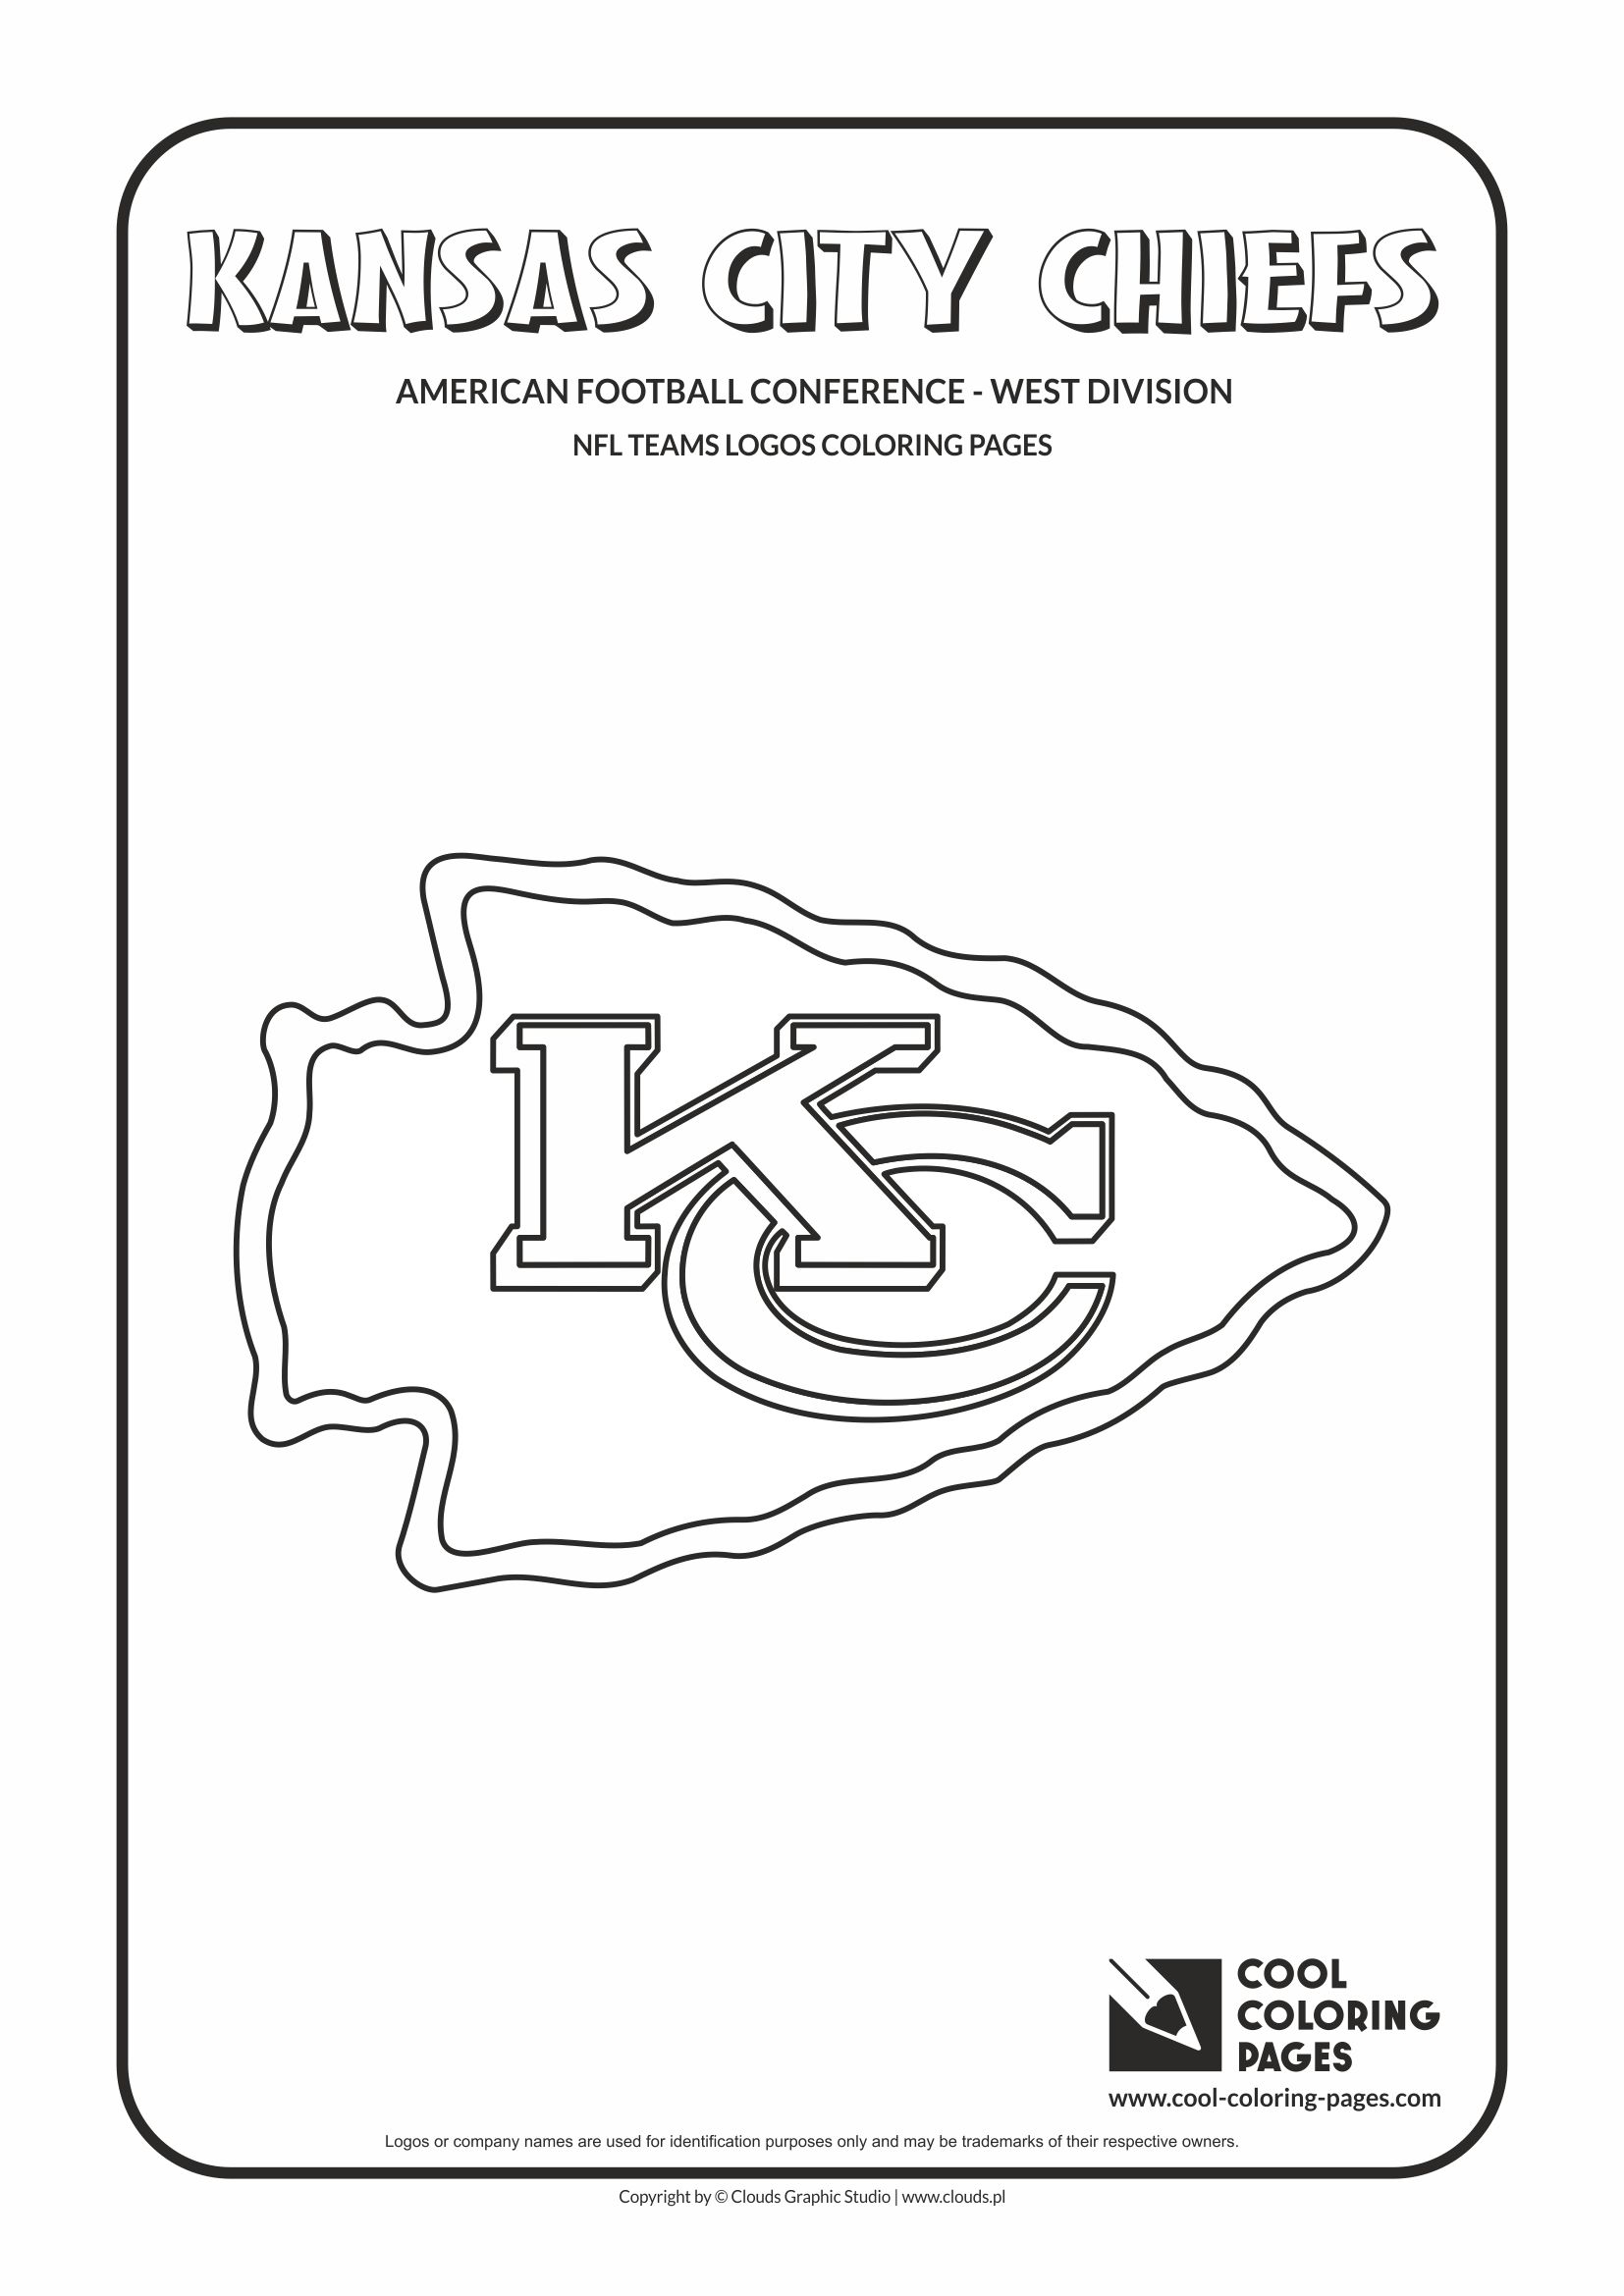 Cool Coloring Pages - NFL American Football Clubs Logos - American Football Conference - West Division / Kansas City Chiefs logo / Coloring page with Kansas City Chiefs logo